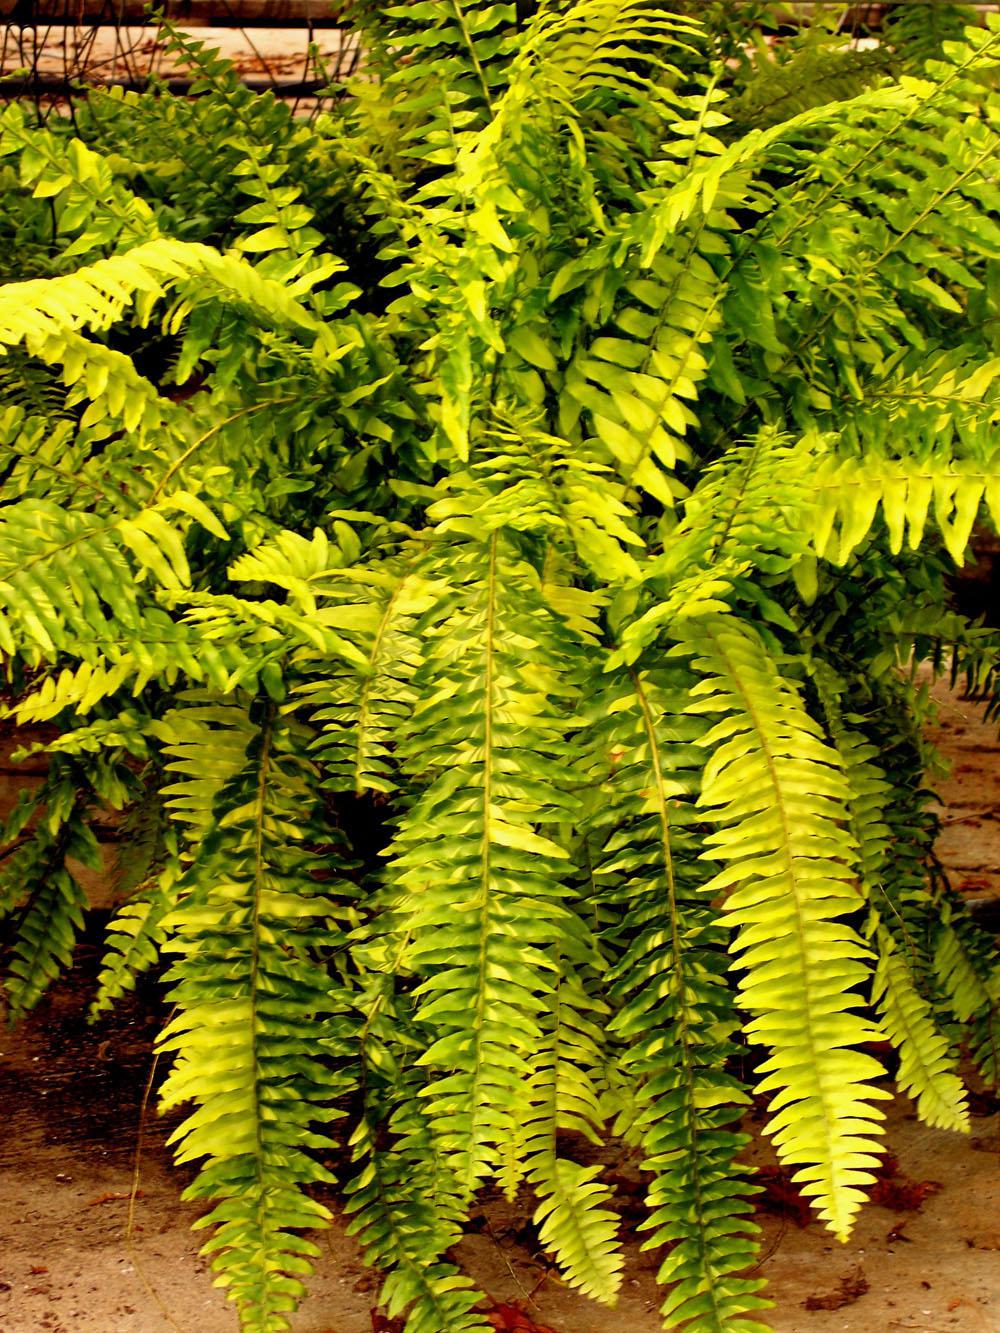 Each Tiger Fern frond resemble a tiger's stripes with different colors and different patterns of variegation. The colors will vary from dark green to lime green and golden yellow.  